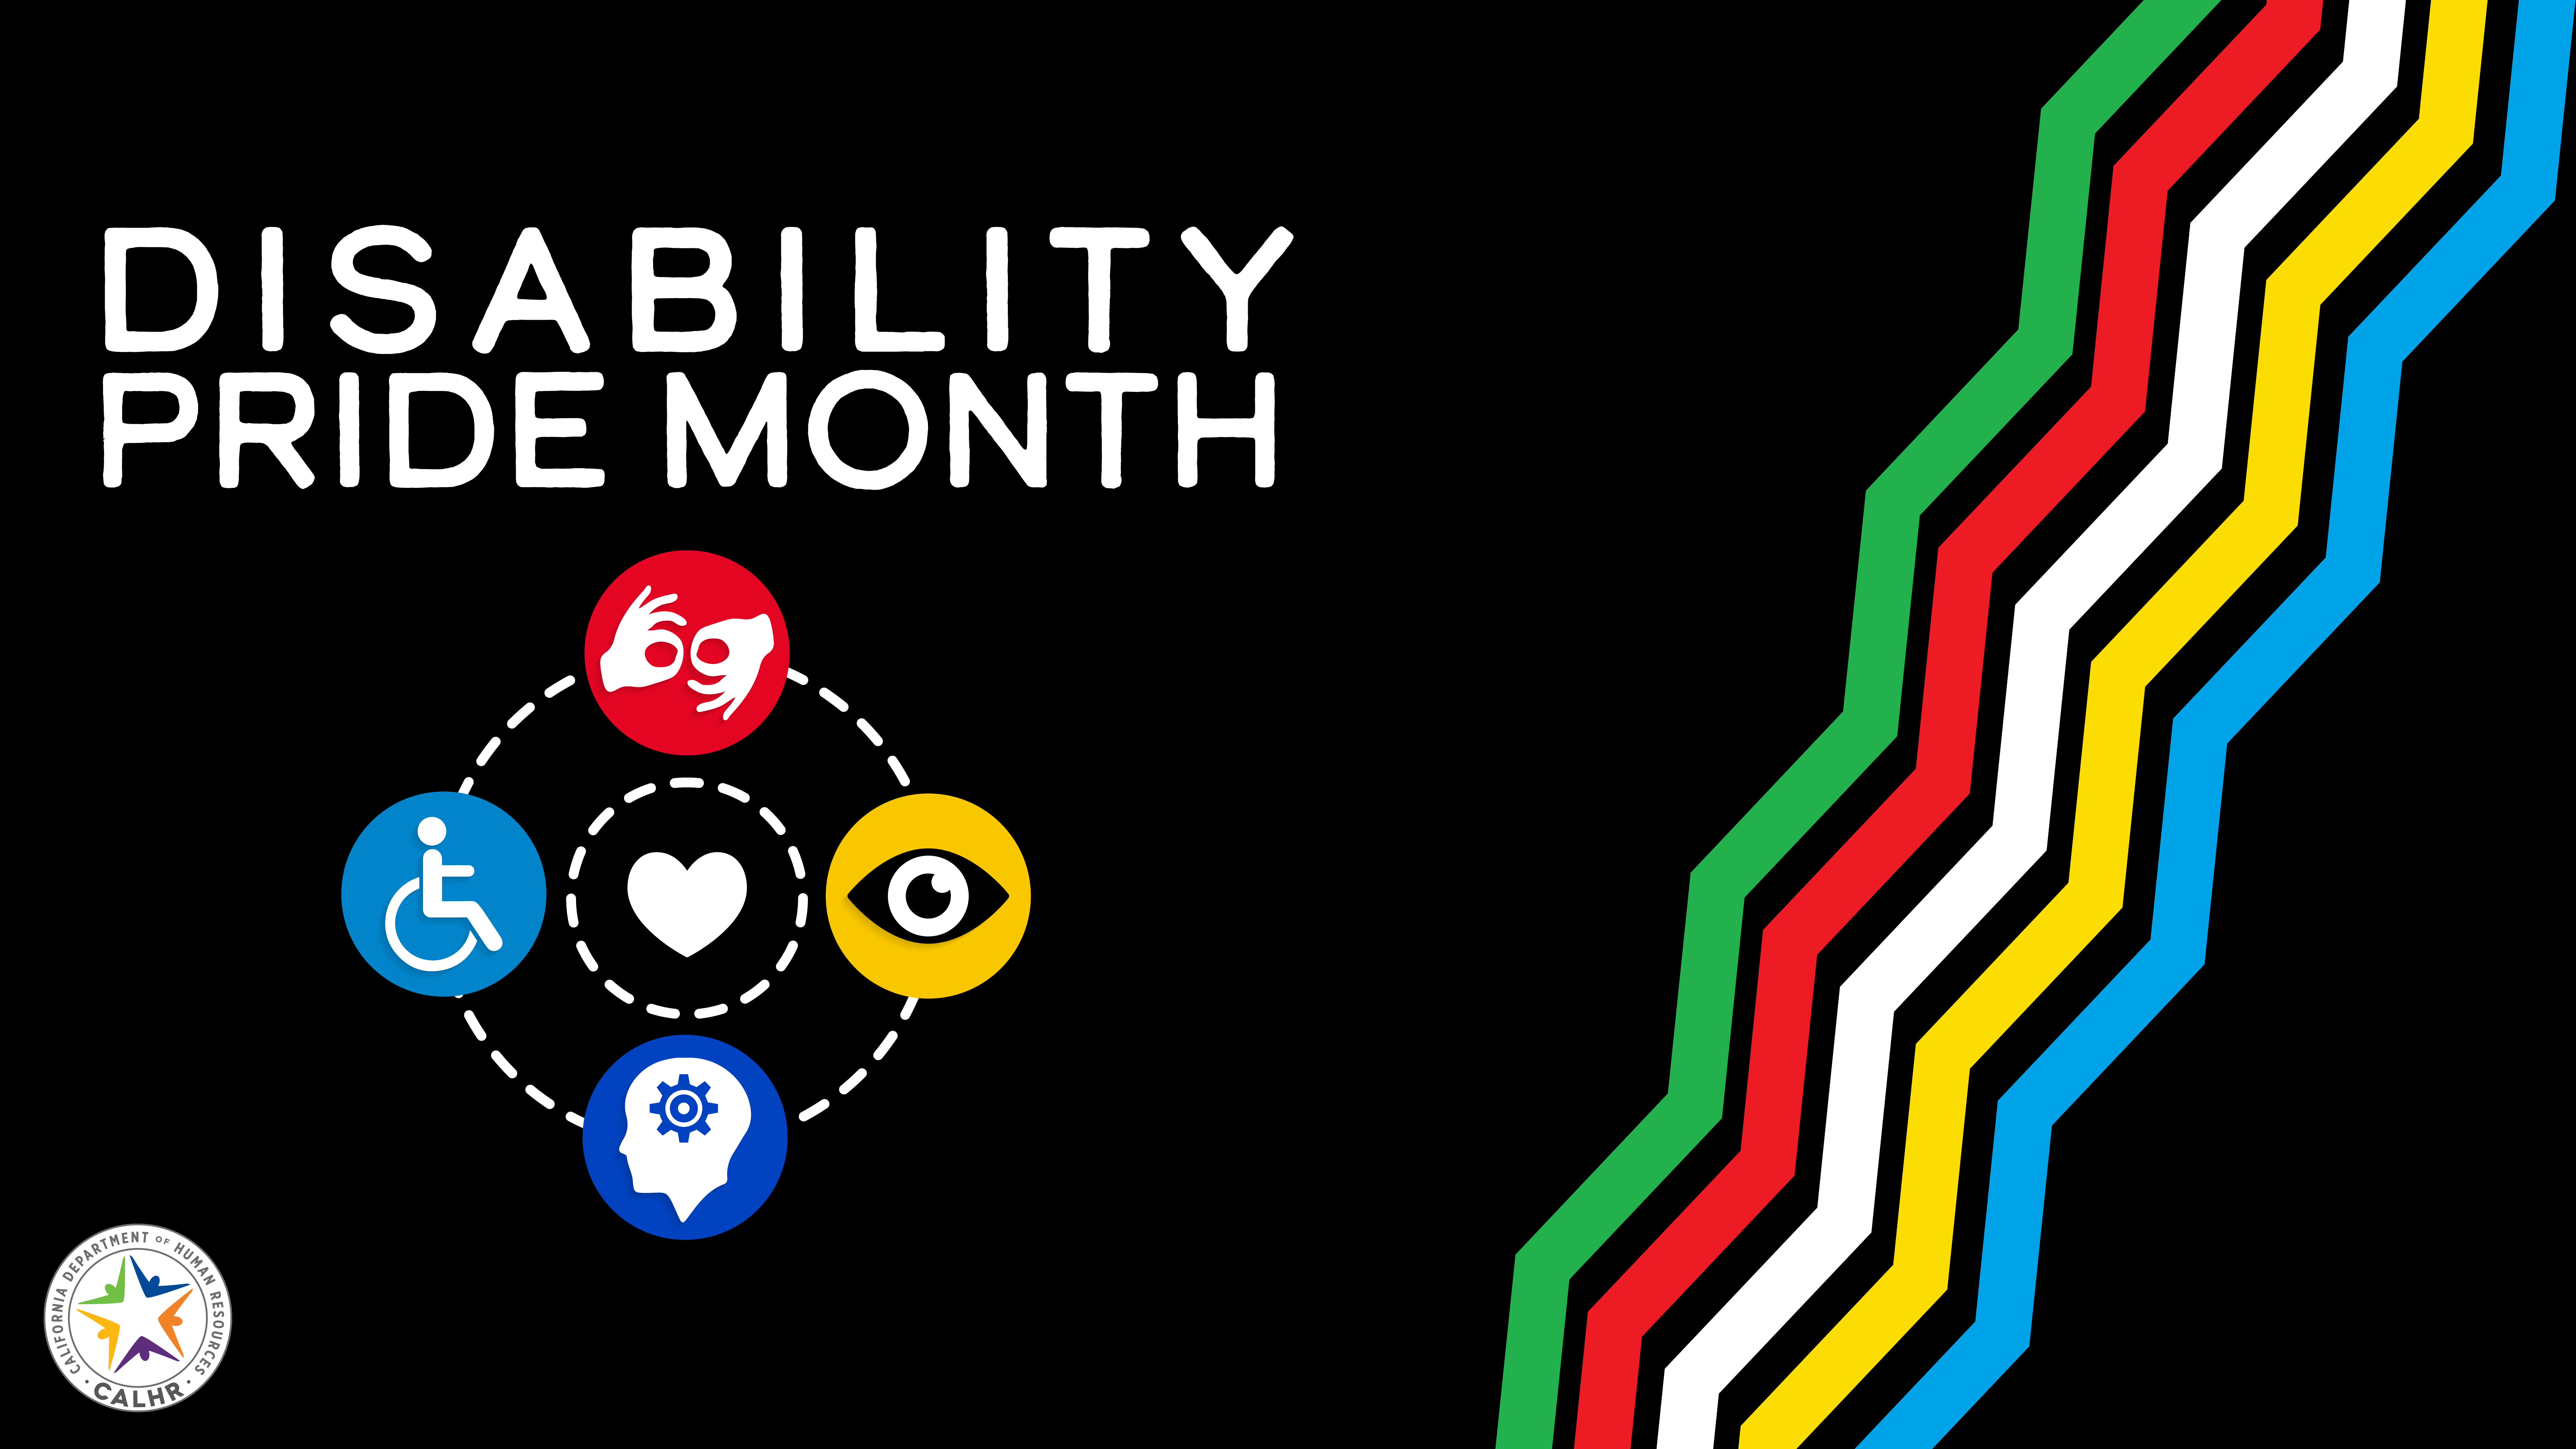 black background with red, yellow, white, and blue disability symbols. 5 bands of color on right. Disability Pride Month